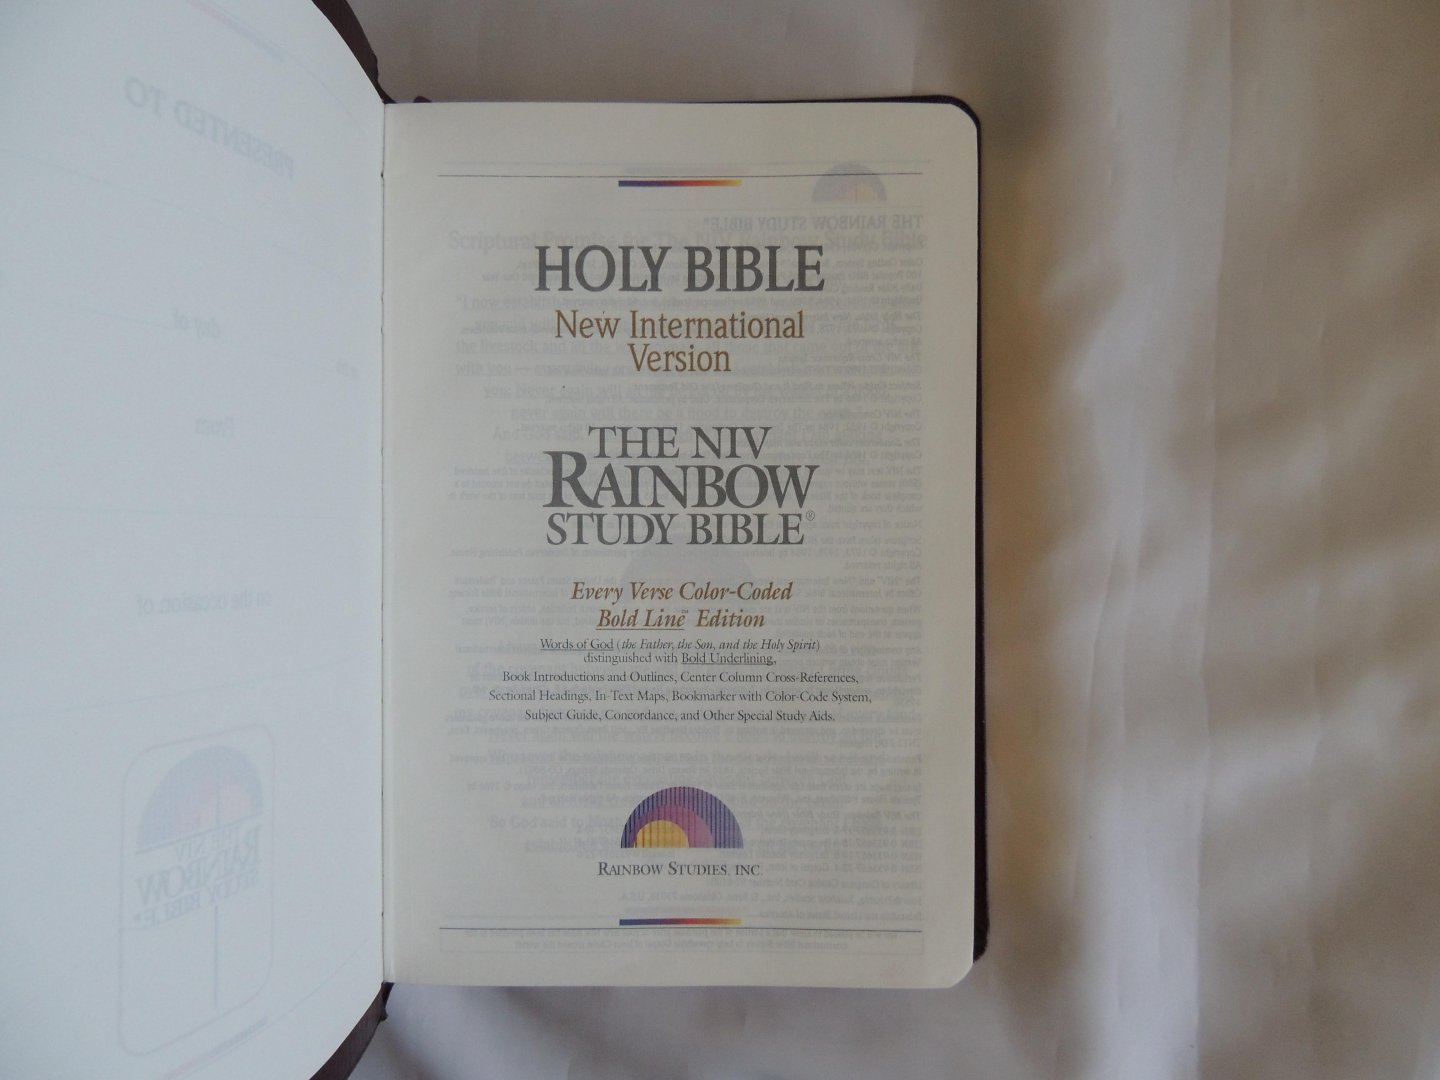  - Rainbow Study Bible-NIV - New International Version, Saddle Brown, LeatherTouch, Indexed